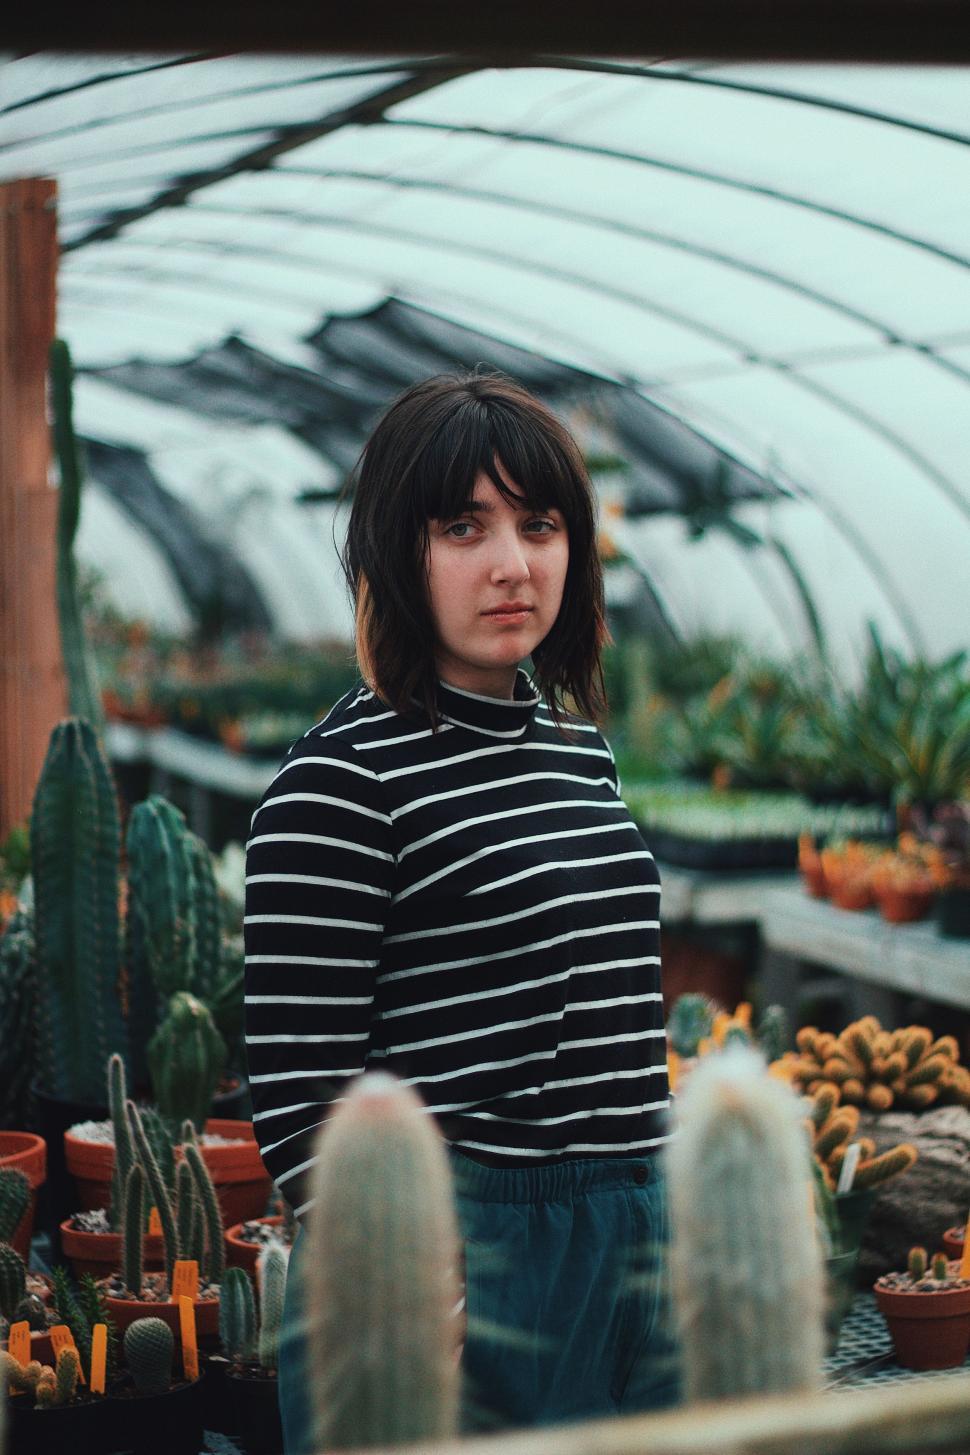 Free Image of Woman Standing in Front of Cacti-Filled Greenhouse 